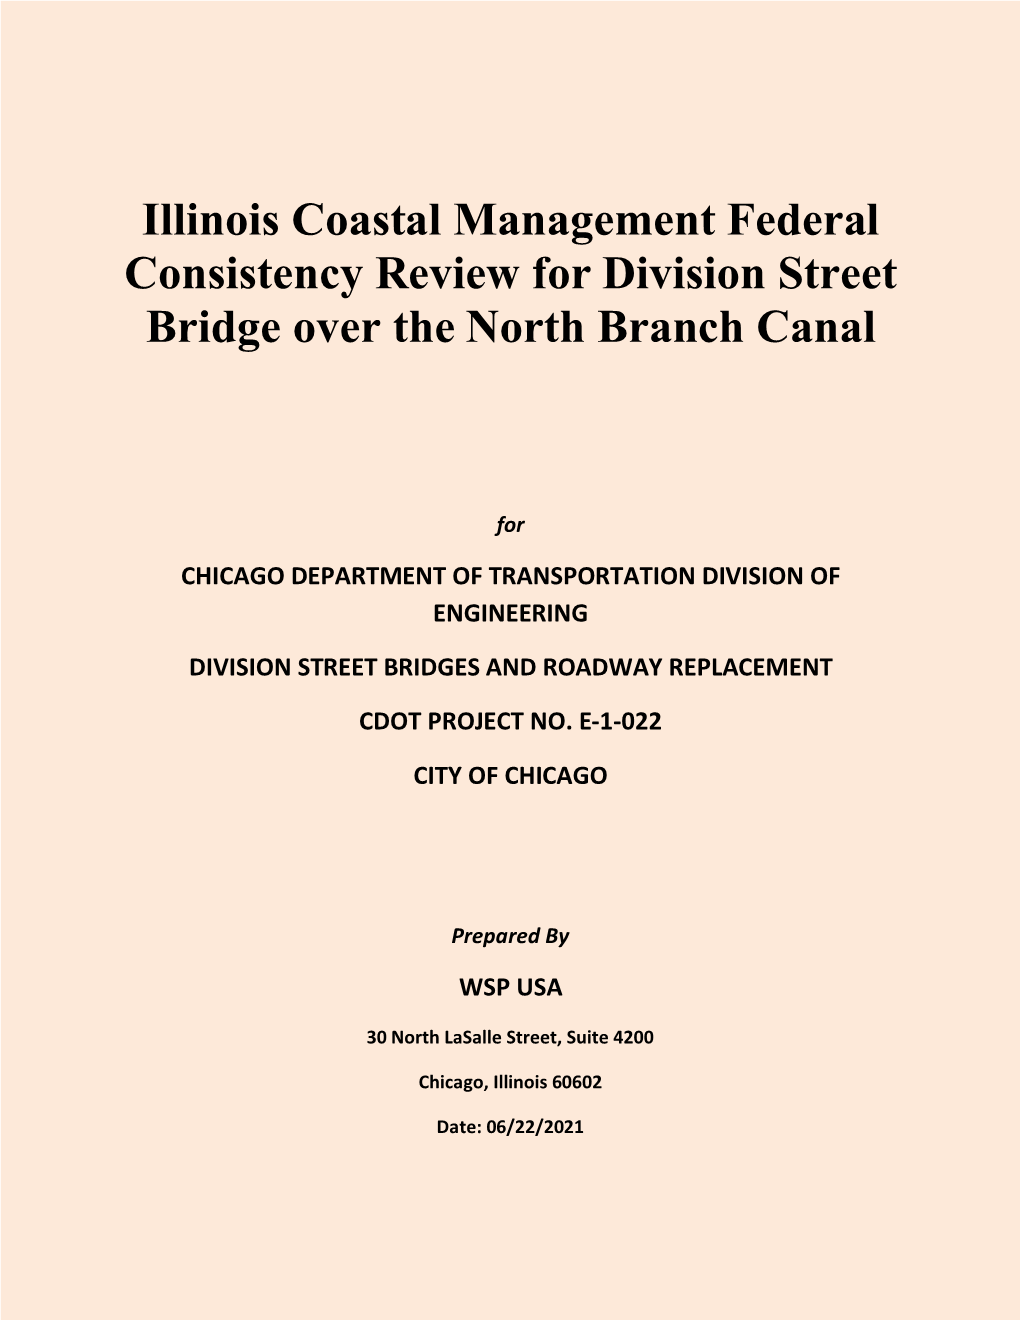 Illinois Coastal Management Federal Consistency Review for Division Street Bridge Over the North Branch Canal